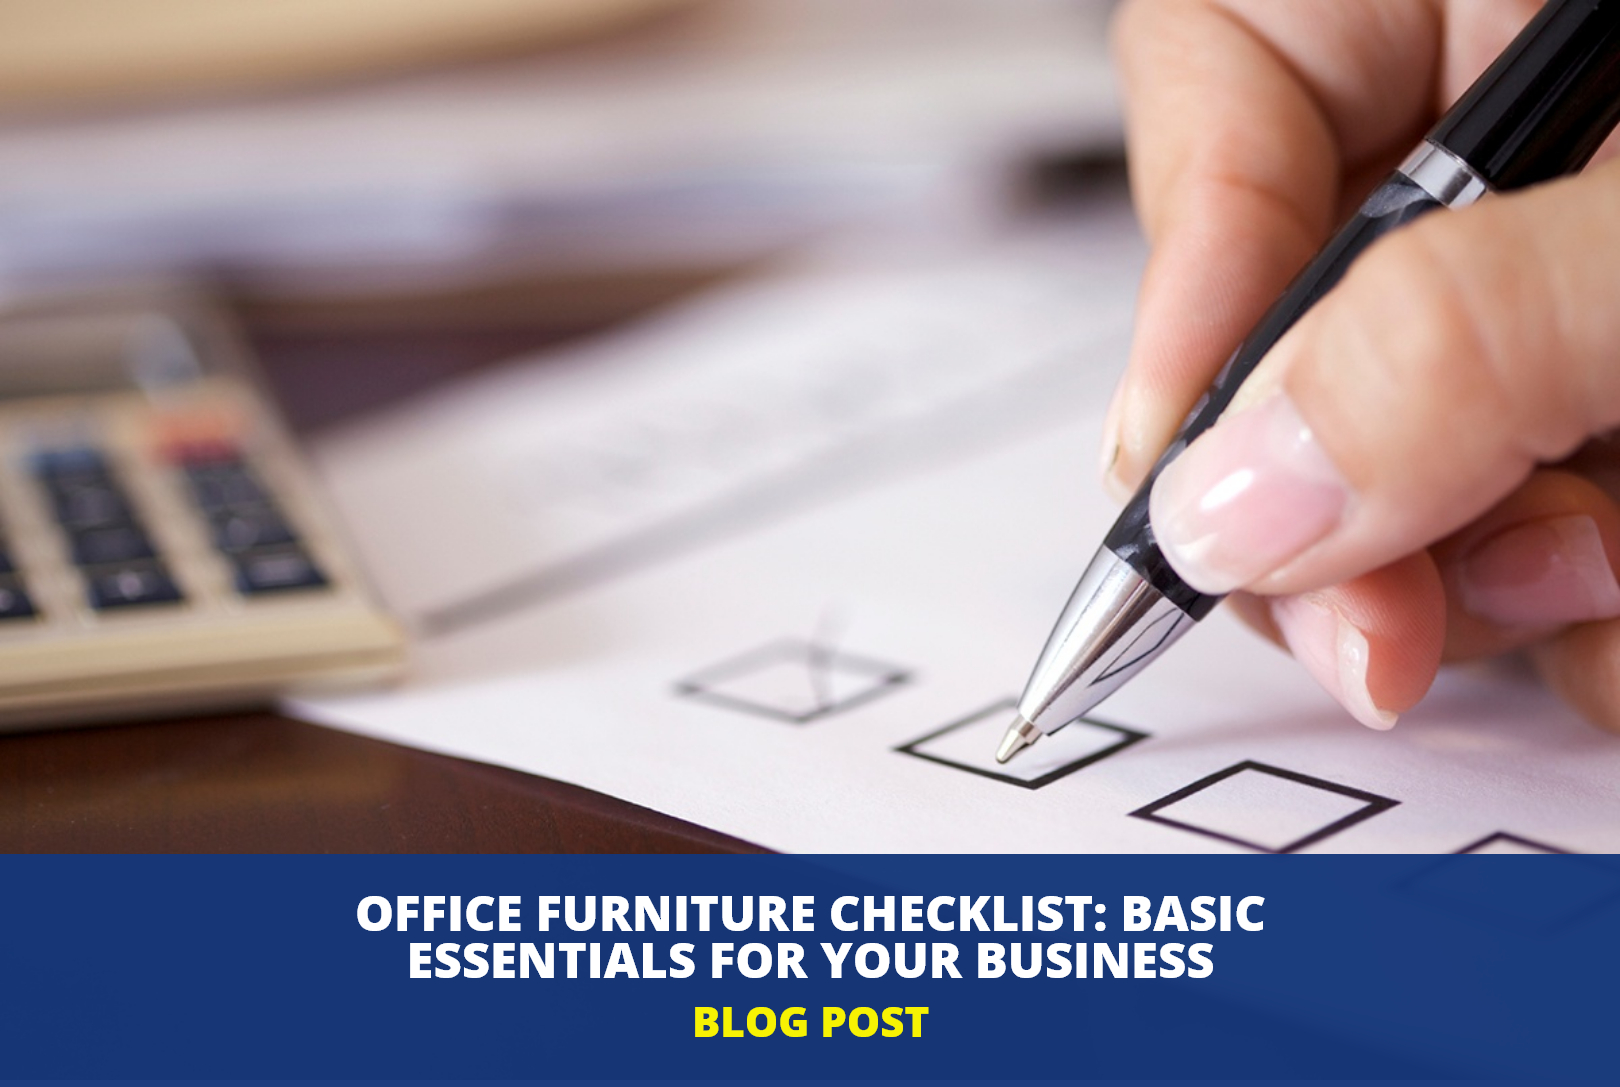 Office Furniture Checklist: Basic Essentials for Your Business